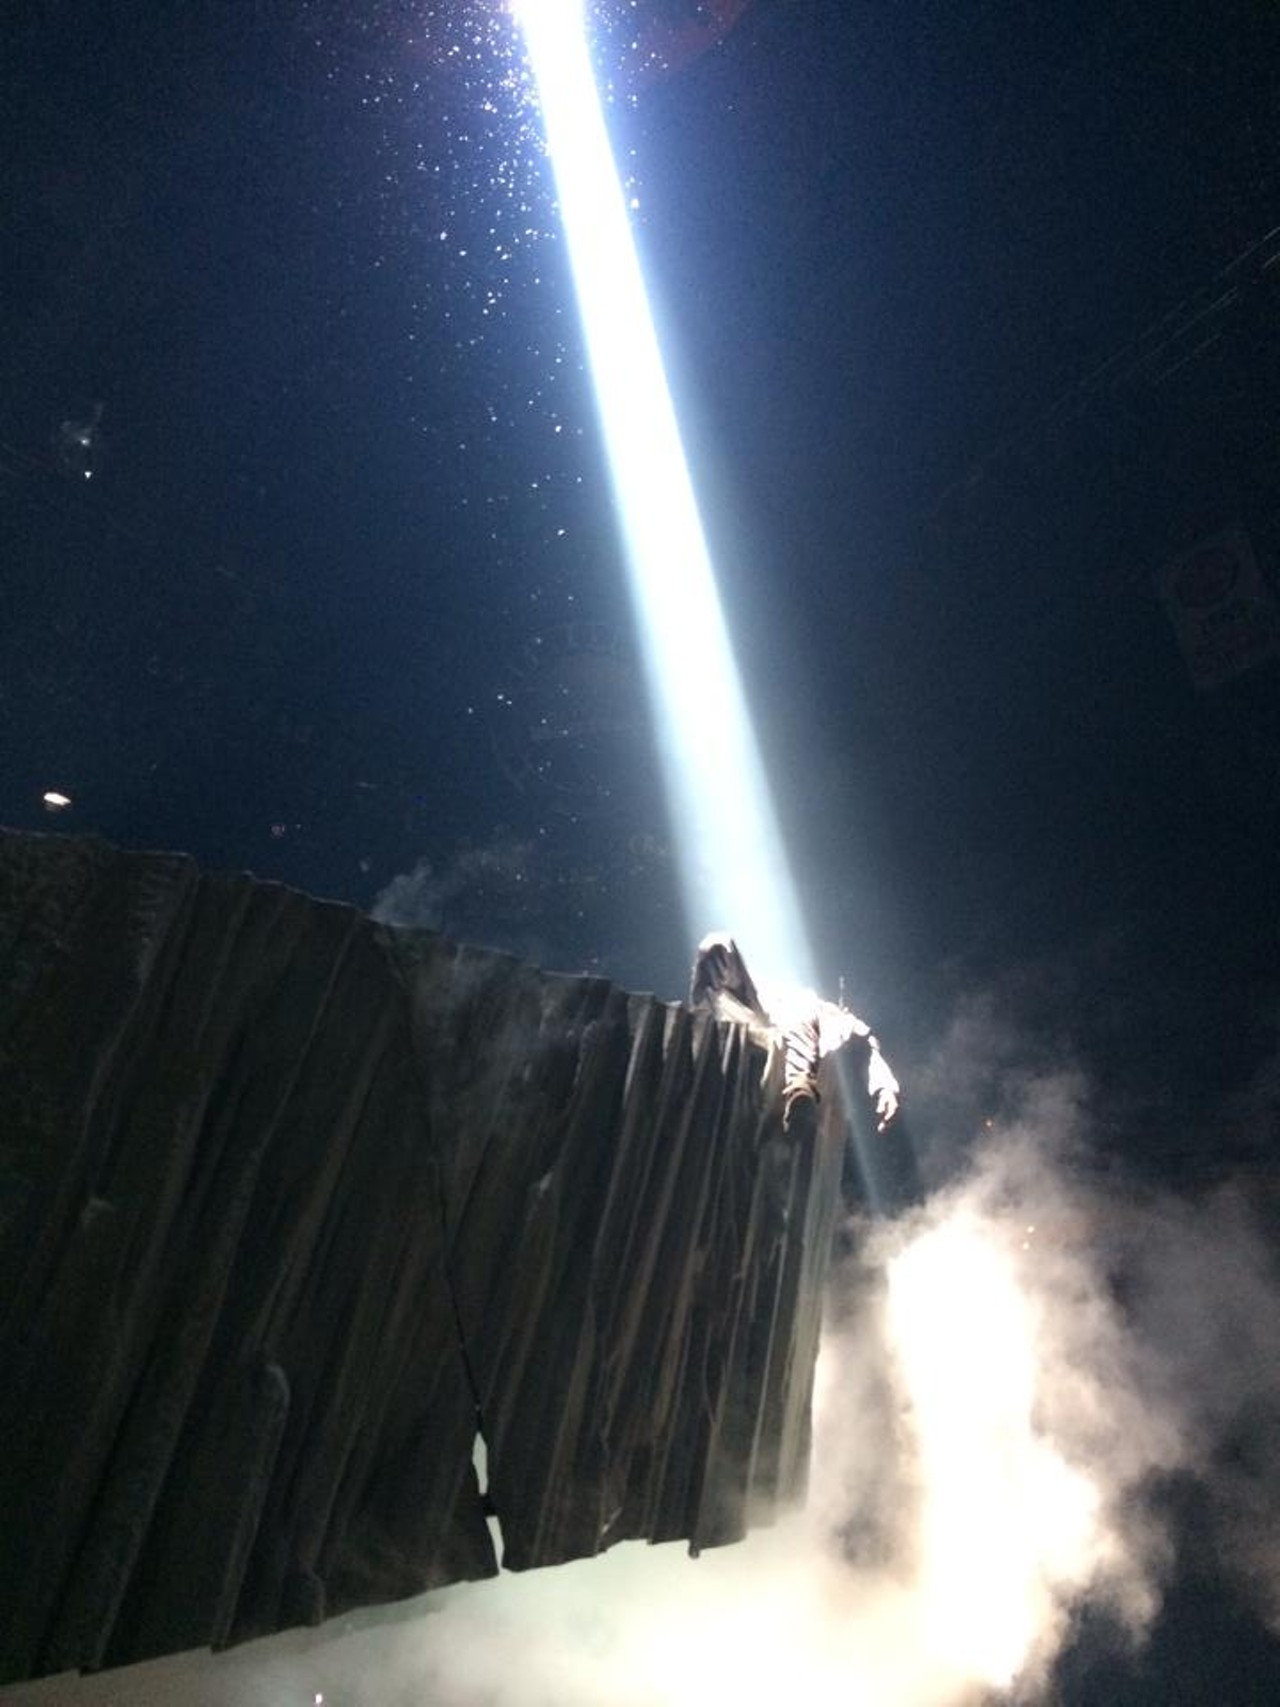 25 Photos from Kanye West's Yeezus Tour at The Palace